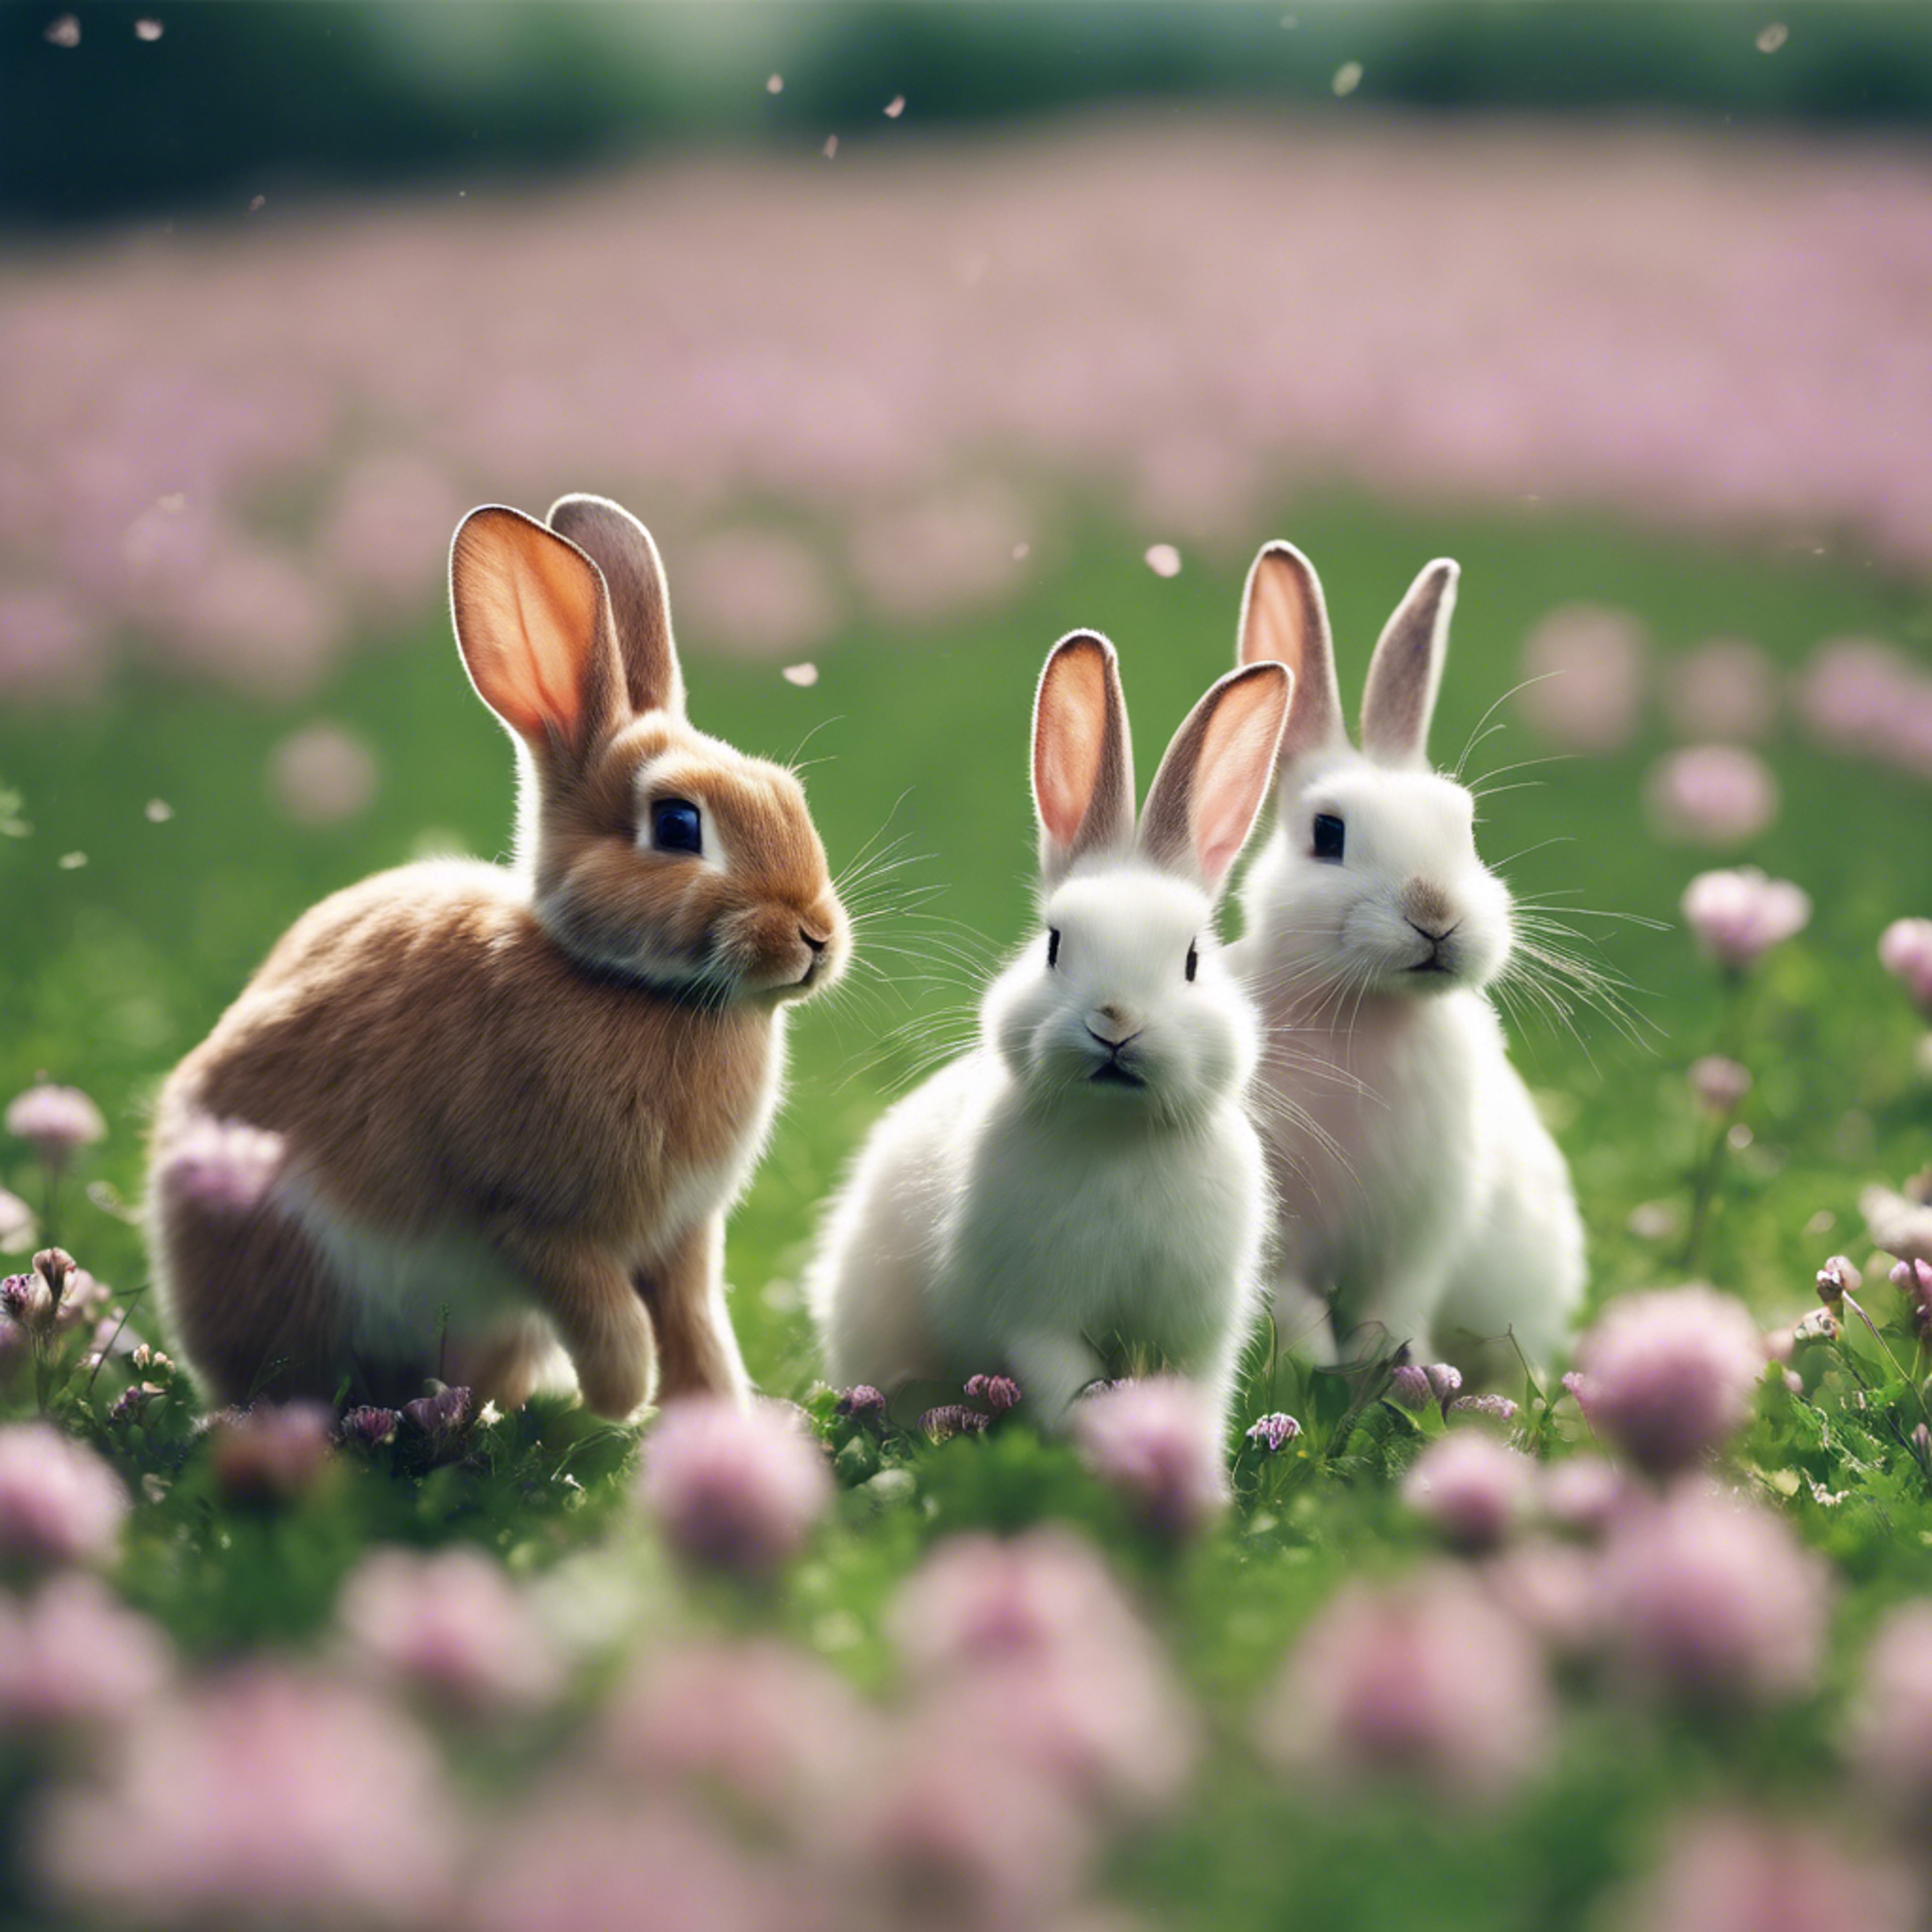 A group of rabbits playing tag in a clover field. Hintergrund[610eb32603614430a4af]